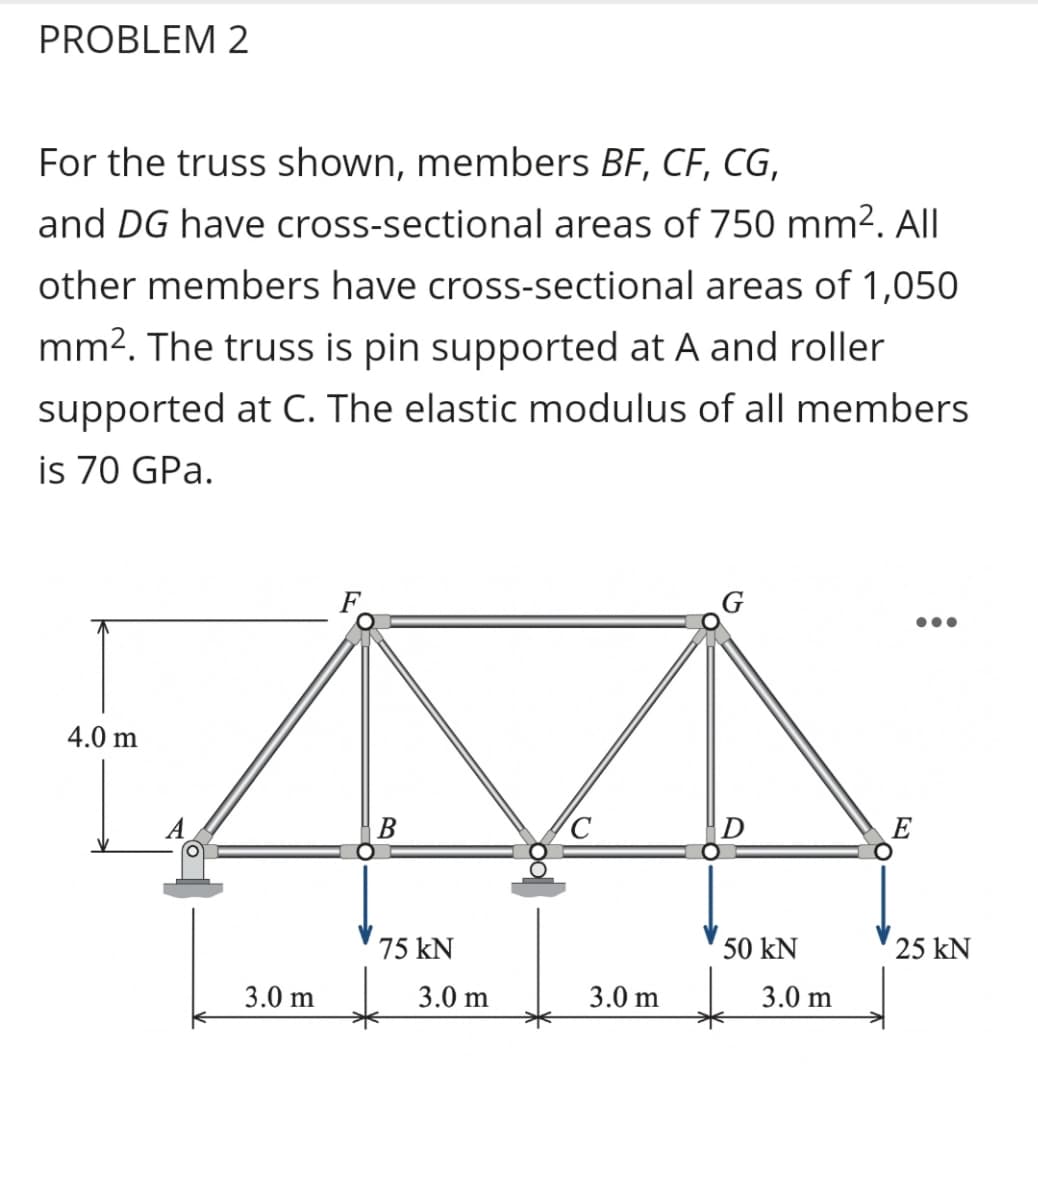 PROBLEM 2
For the truss shown, members BF, CF, CG,
and DG have cross-sectional areas of 750 mm². All
other members have cross-sectional areas of 1,050
mm2. The truss is pin supported at A and roller
supported at C. The elastic modulus of all members
is 70 GPa.
4.0 m
В
E
75 kN
50 kN
25 kN
3.0 m
3.0 m
3.0 m
3.0 m
